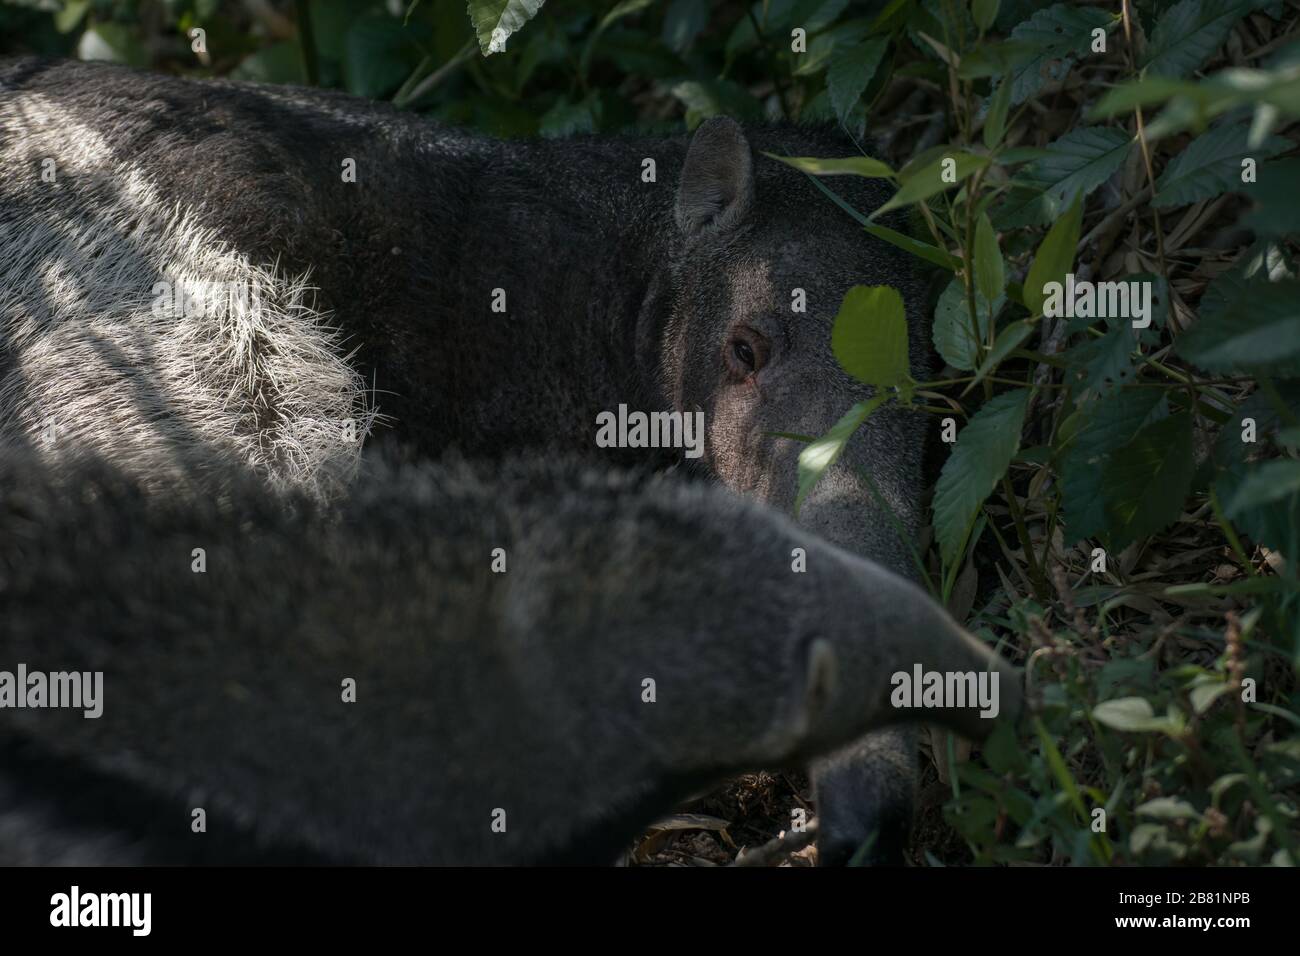 Adorable moment of a female giant anteater playing with her calf on the grass Stock Photo